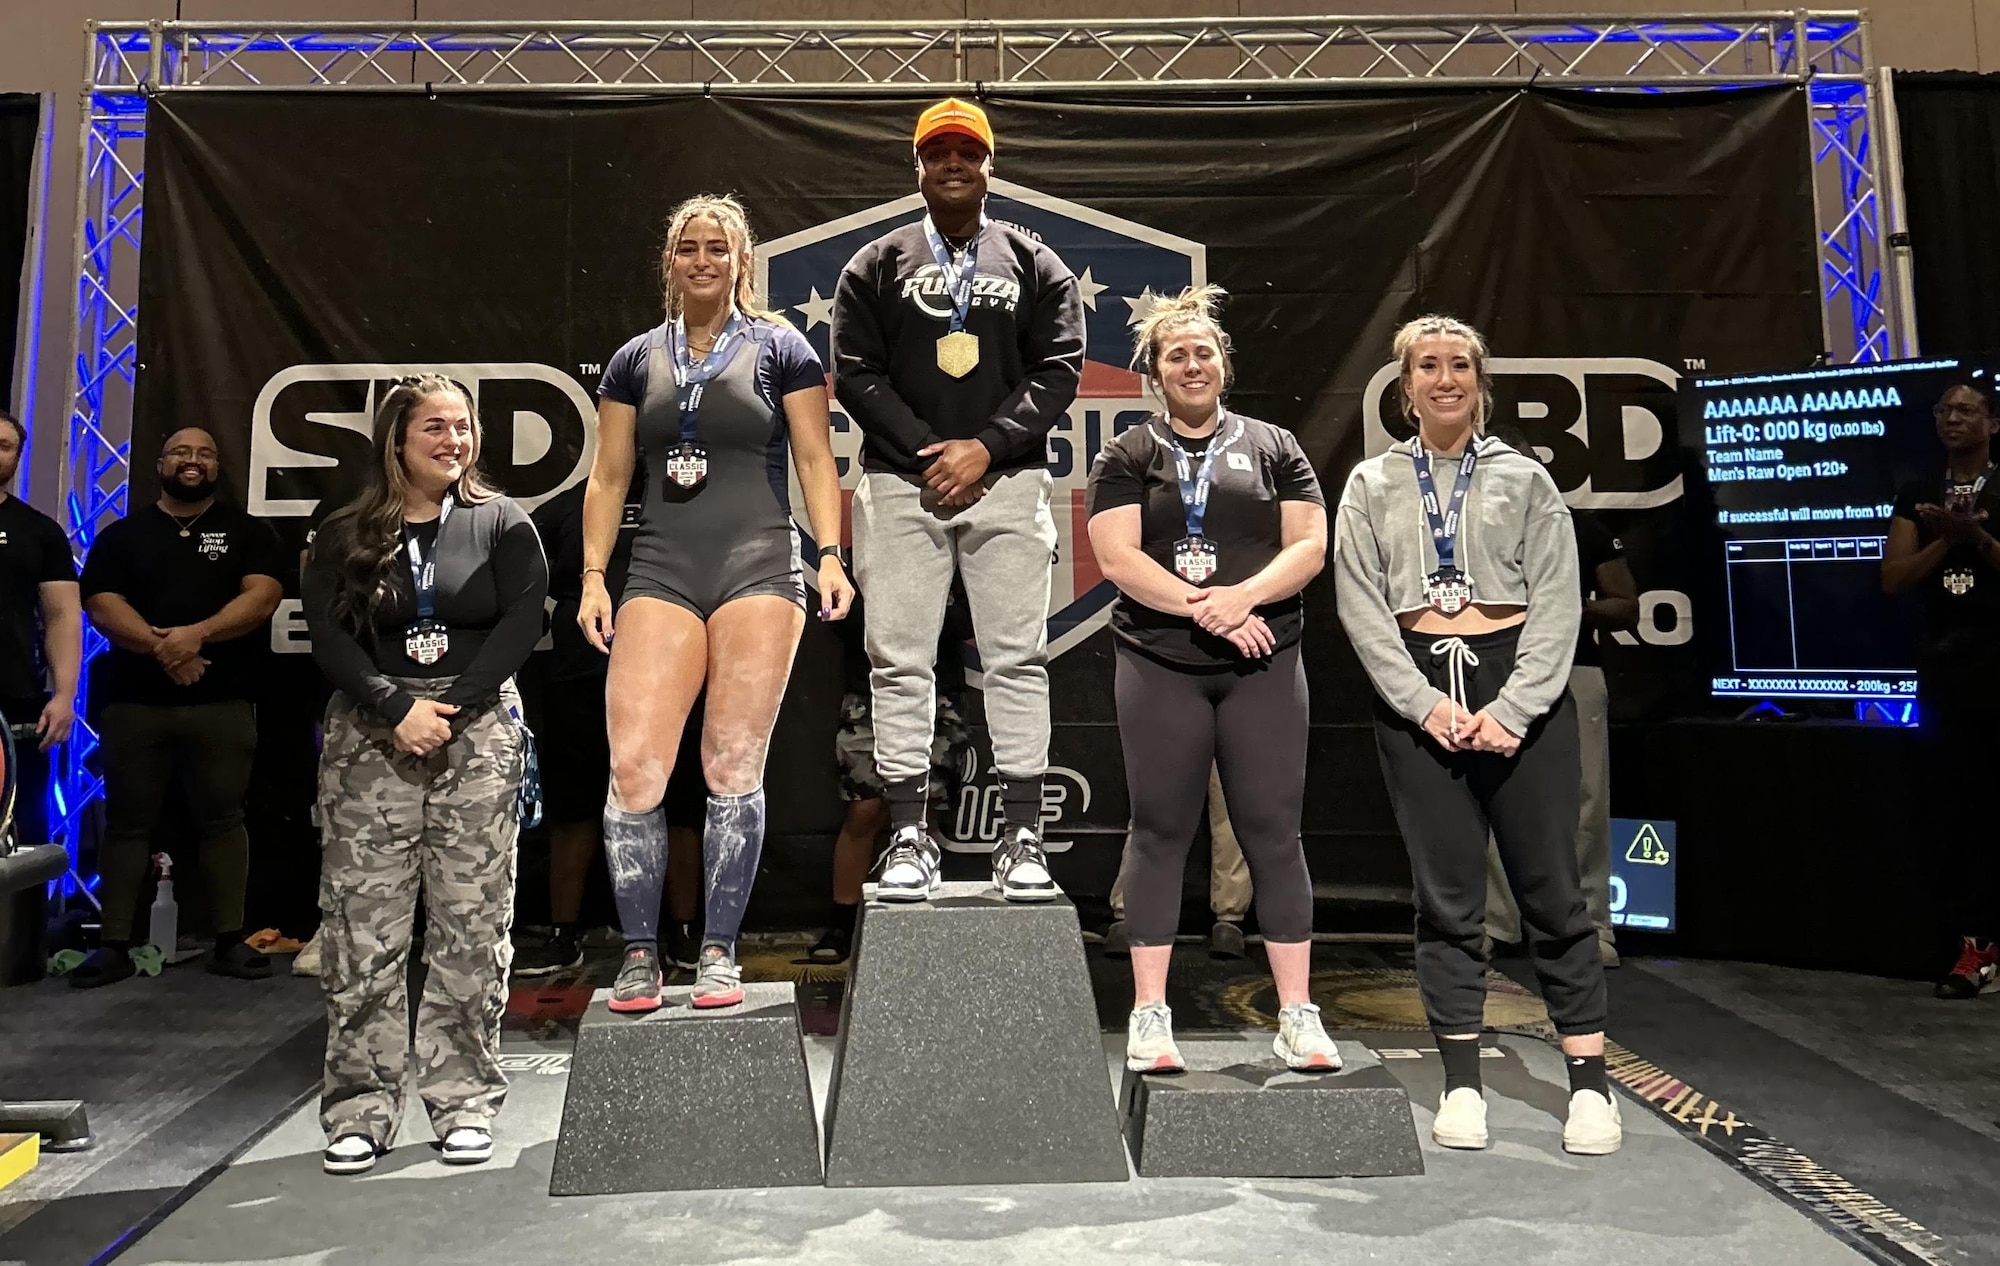 Tech. Sgt. Tiffany Savage stands at the center of the photo among other women powerlifters after competing in the 2024 Powerlifting America Nationals.